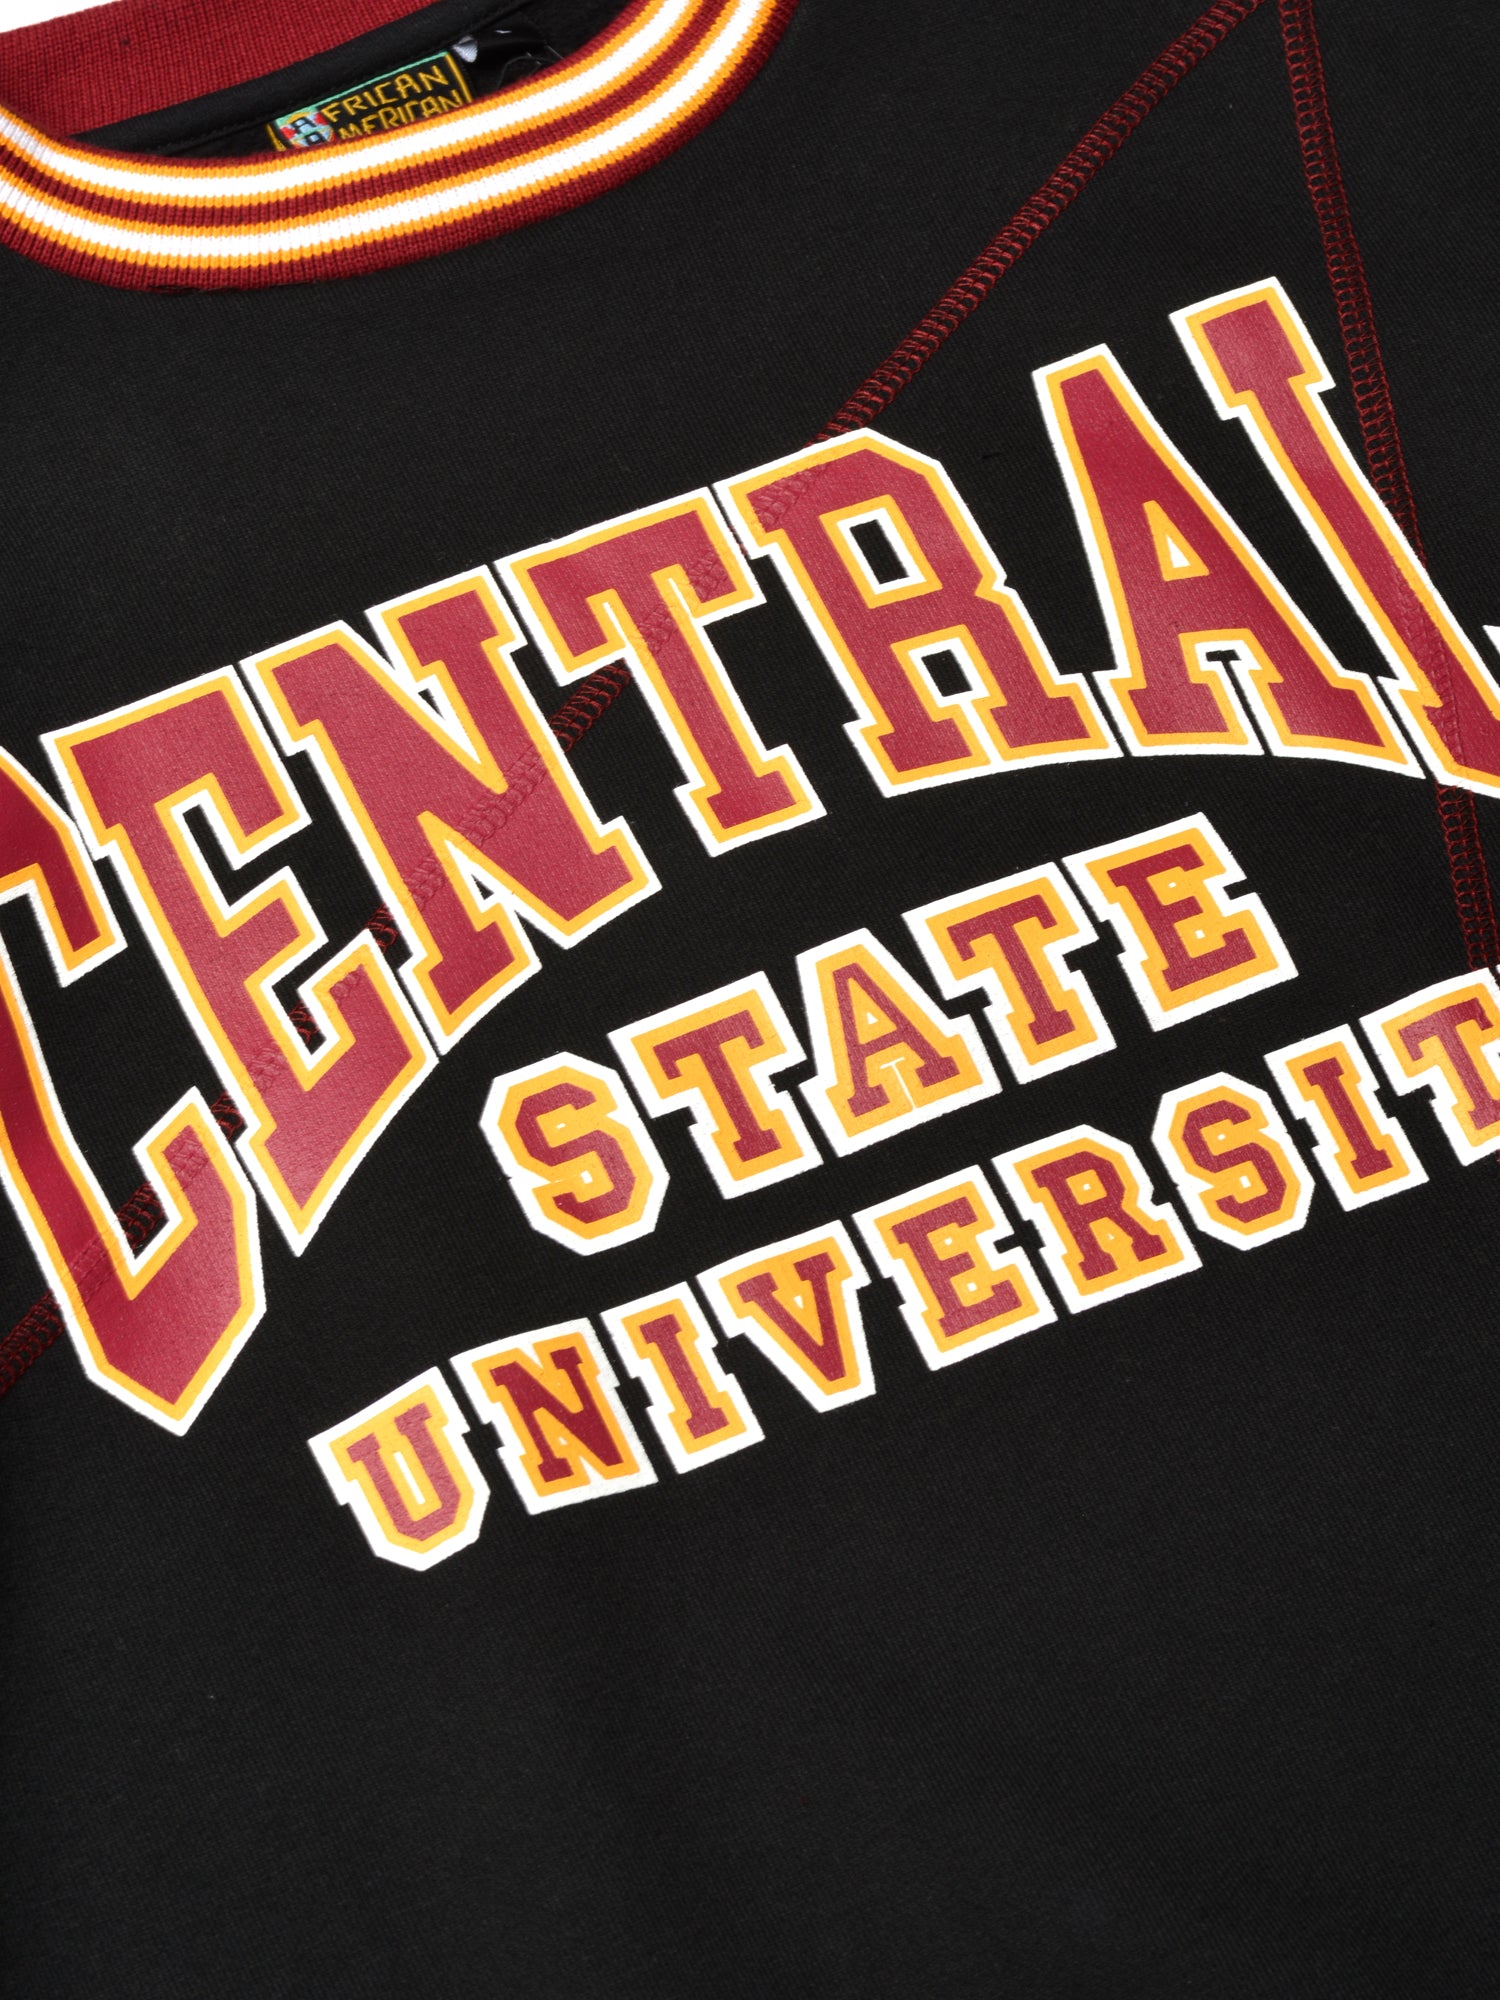 central state university notable alumni